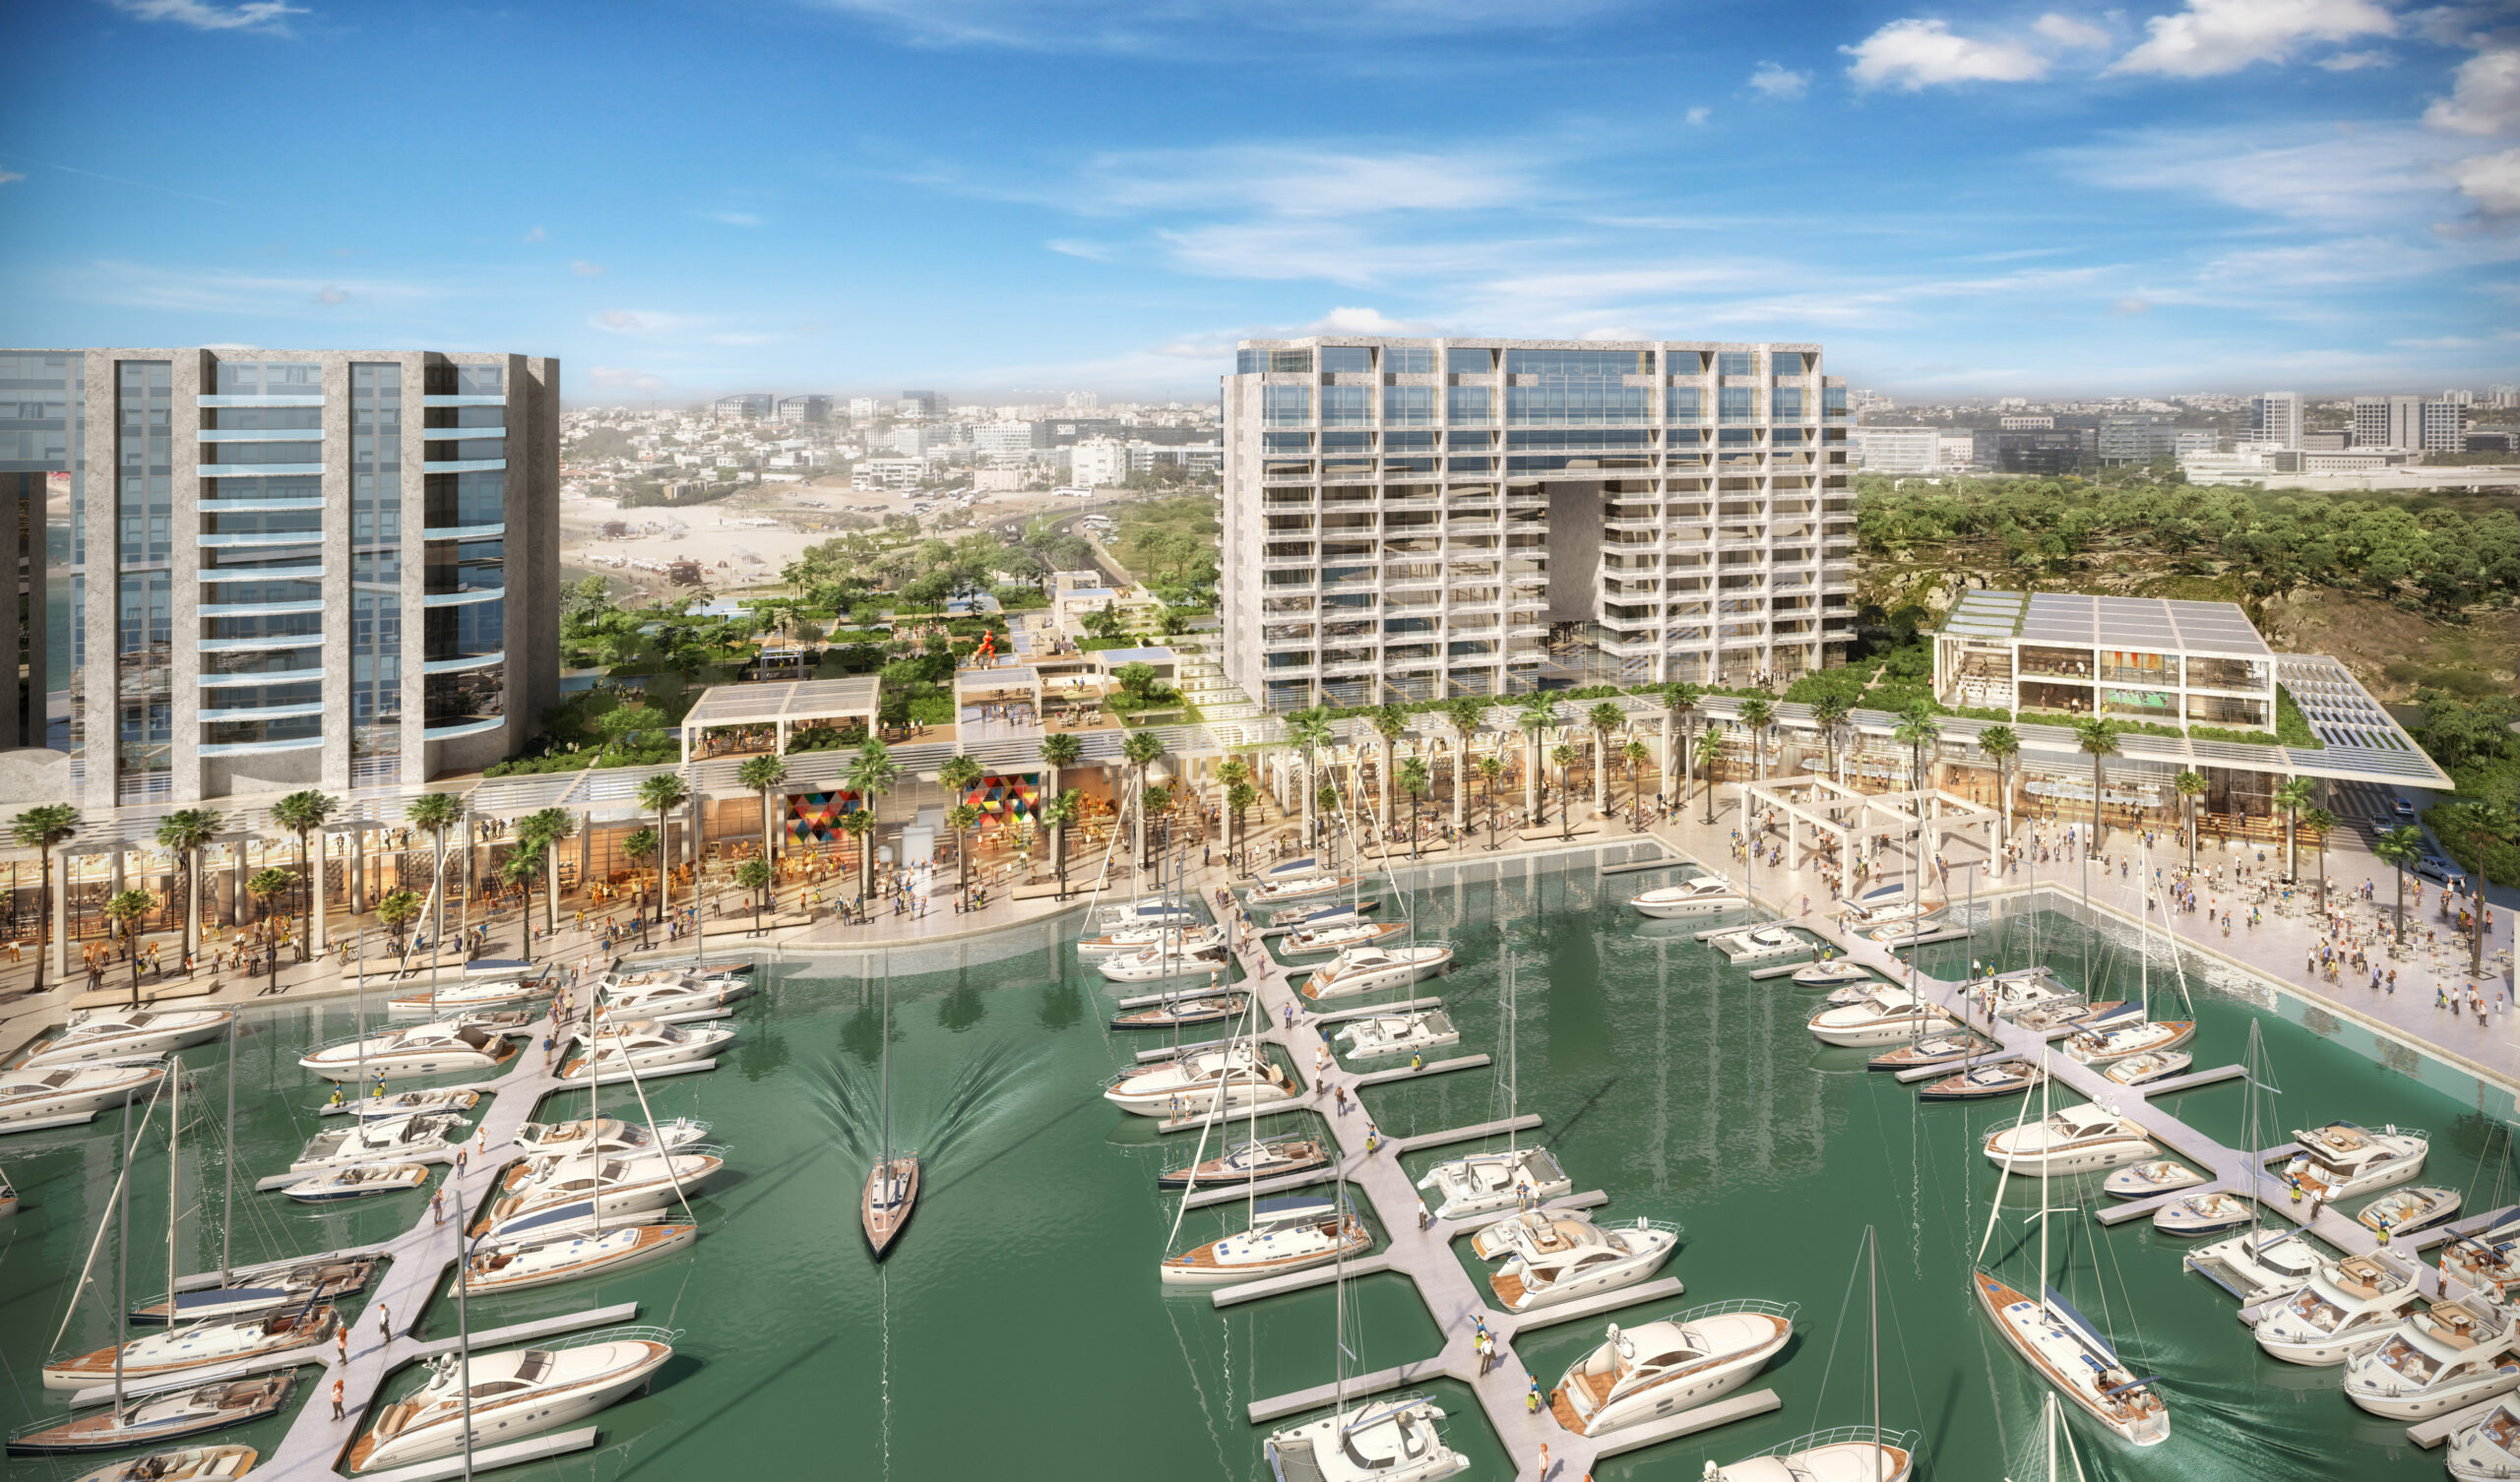 Arena: Preview of Marina Herzliya’s mixed-use complex with hospitality, commercial areas, and public outdoor spaces | Reality the Leading Group of Real Estate Investment Funds in Israel